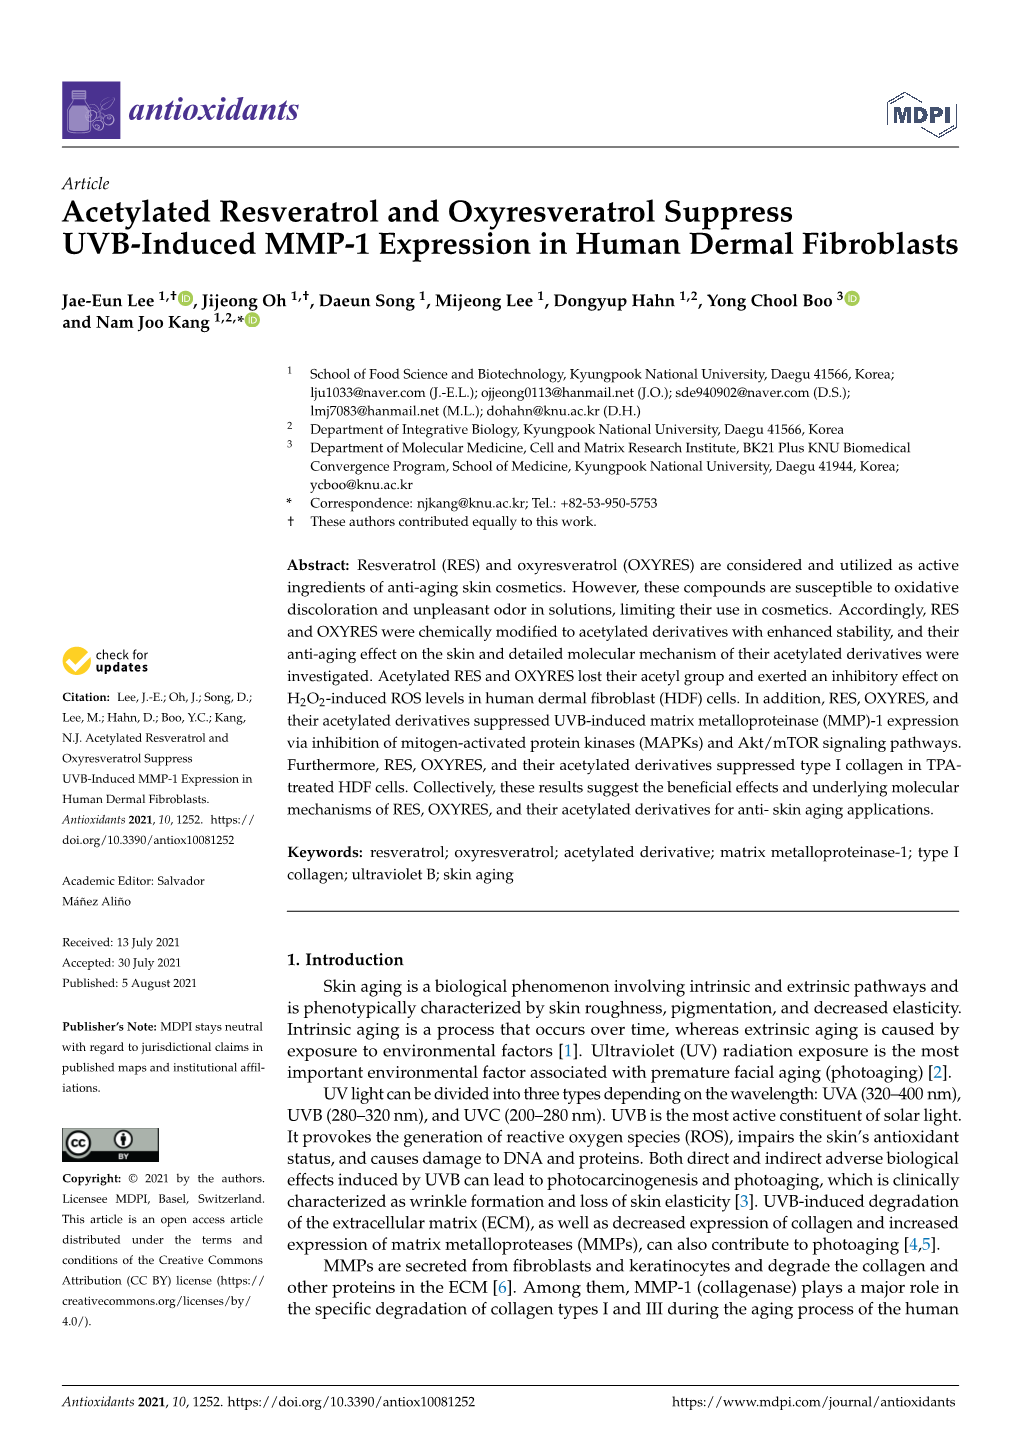 Acetylated Resveratrol and Oxyresveratrol Suppress UVB-Induced MMP-1 Expression in Human Dermal Fibroblasts